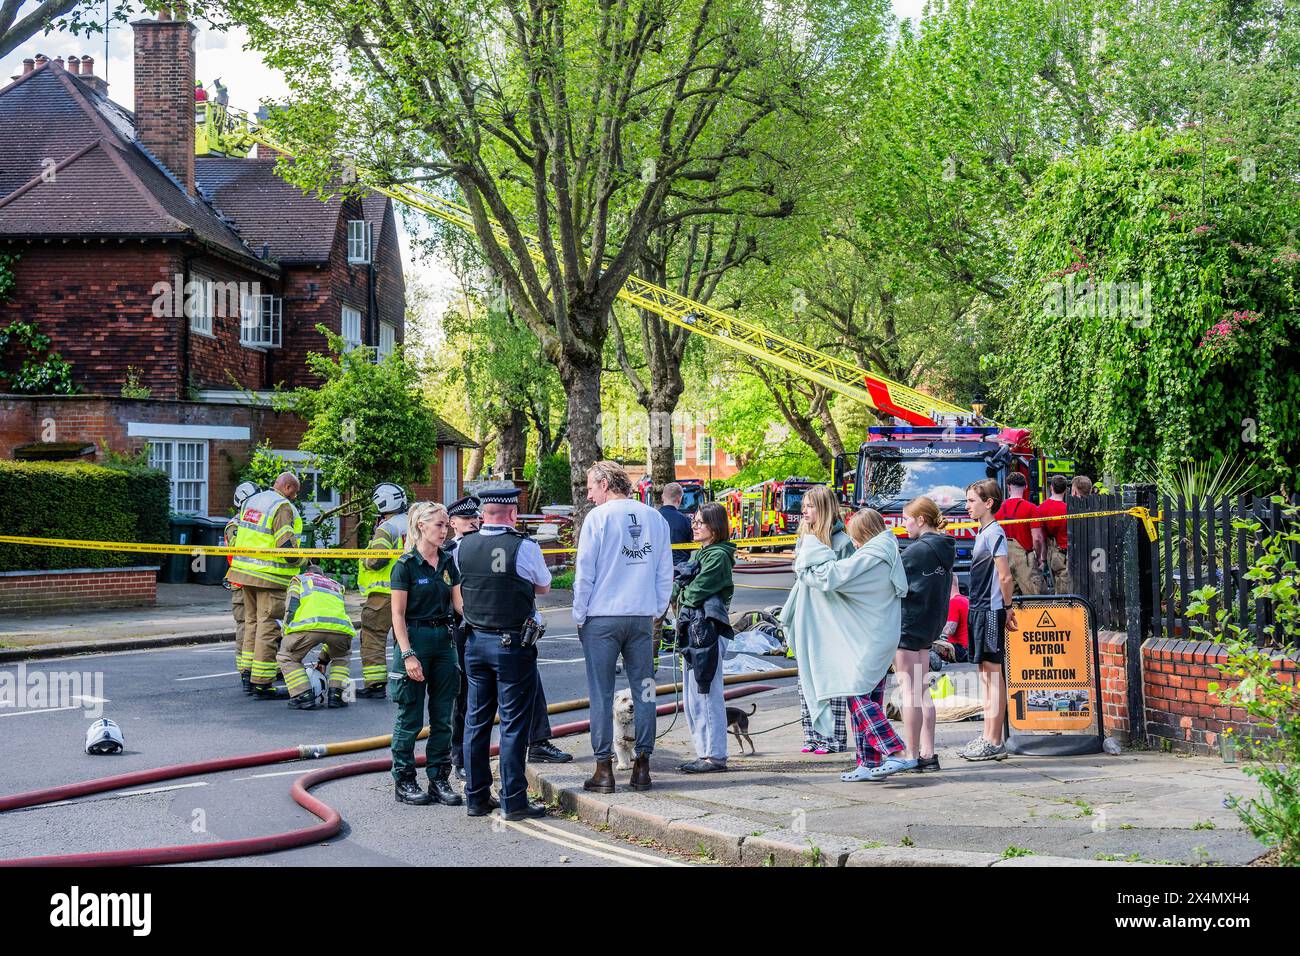 London, UK. 4th May, 2024. Many fire engines, ambulances and police attend a fire in a large house on Elsworthy Road in the Primrose Hill area. The fire appears to have been small and is out and the emergency crews begin to disperse as the displaced family looks on. Ten fire engines and around 70 firefighters responded. Half of the second floor, in a detached house of three floors, was damaged by the fire. One of the Brigade's 32m ladders was deployed along with firefighters from West Hampstead, Paddington, Kentish Town. Credit Guy Bell/Alamy Live News Stock Photo